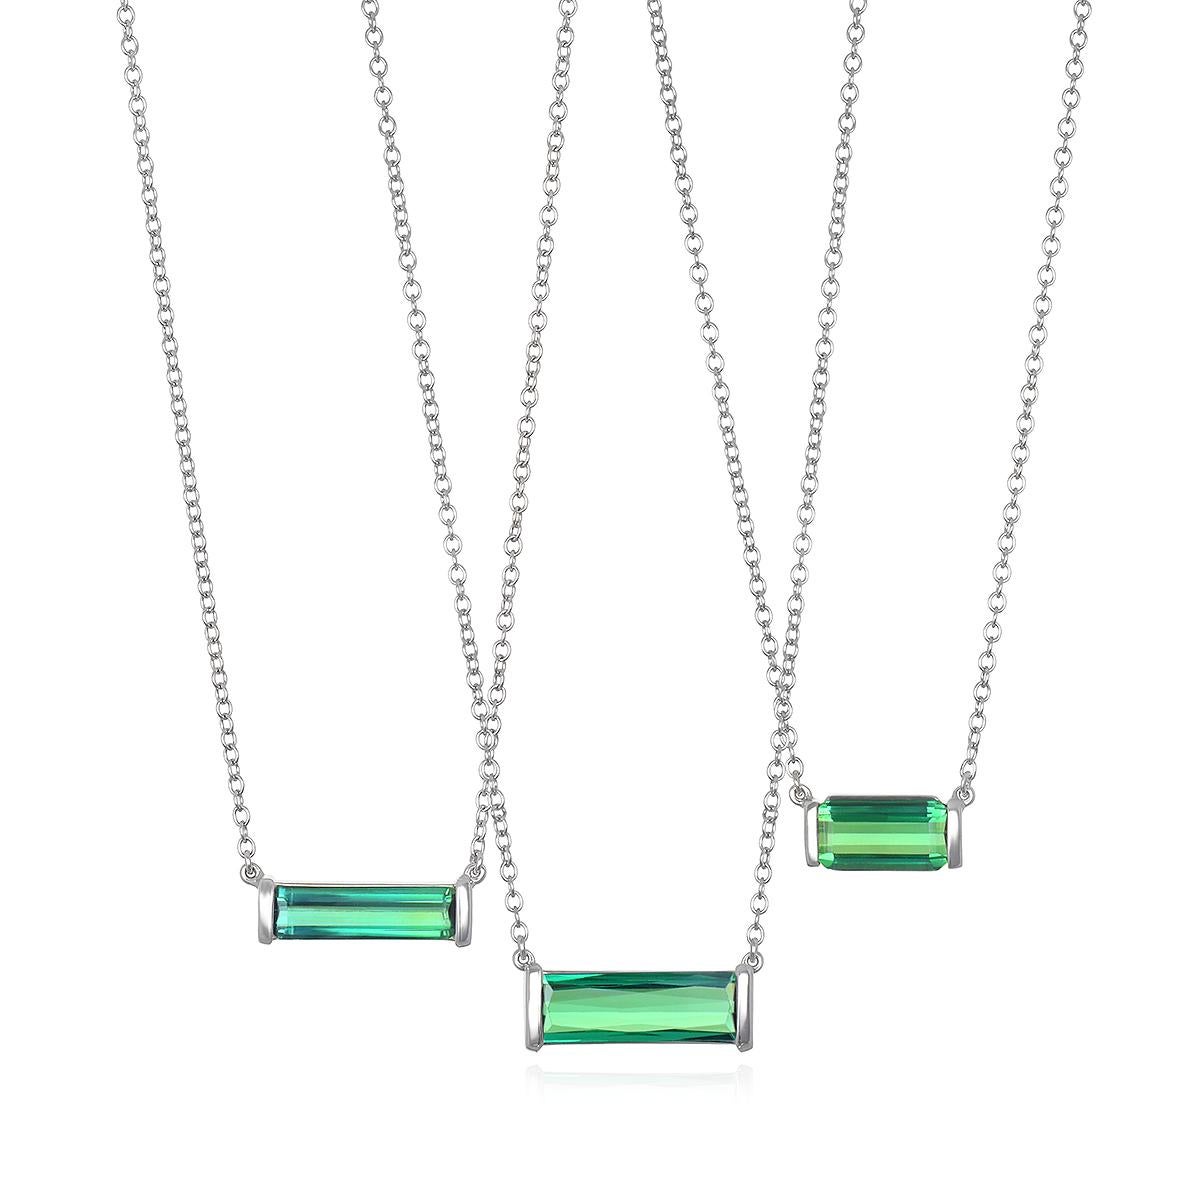 Faye Kim's 18 Karat White Gold Bar Set Green Tourmaline Necklace features a striking, vibrantly-hued gemstone set in a matte white gold finish; certain to add sparkle to any wardrobe and can be worn alone or layered with other necklaces. 

Green